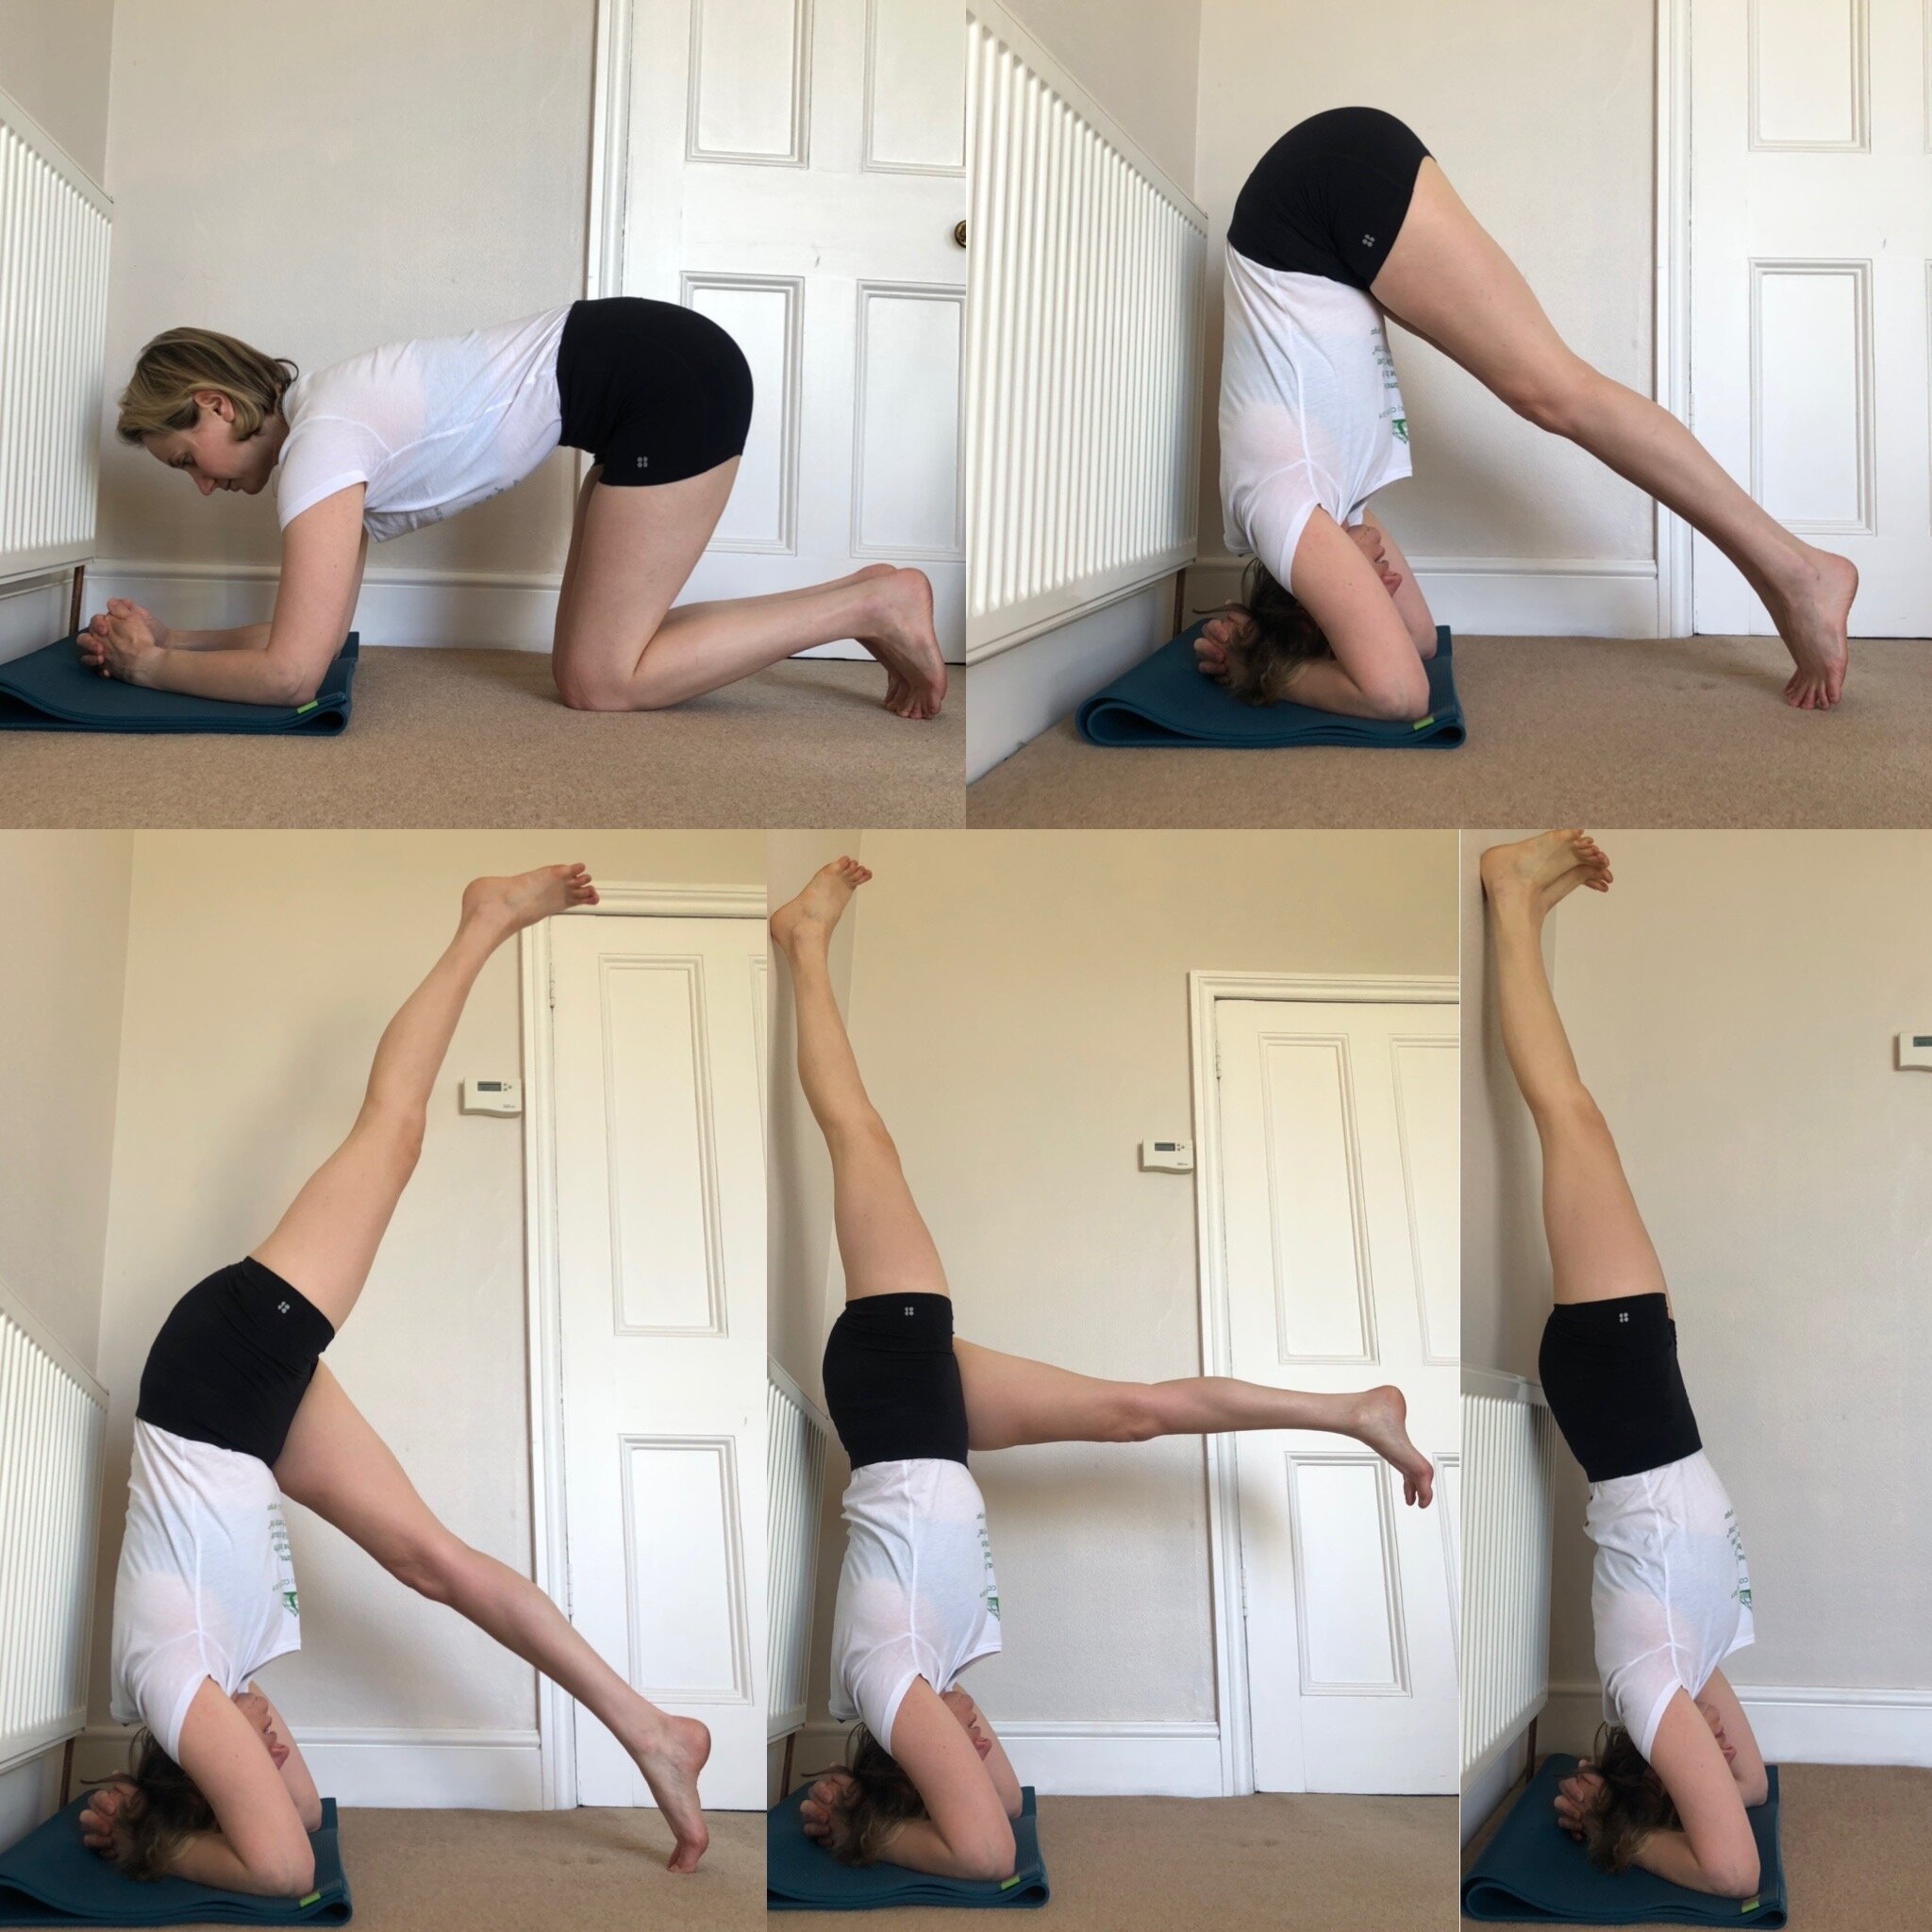 How to Do Headstand in Yoga